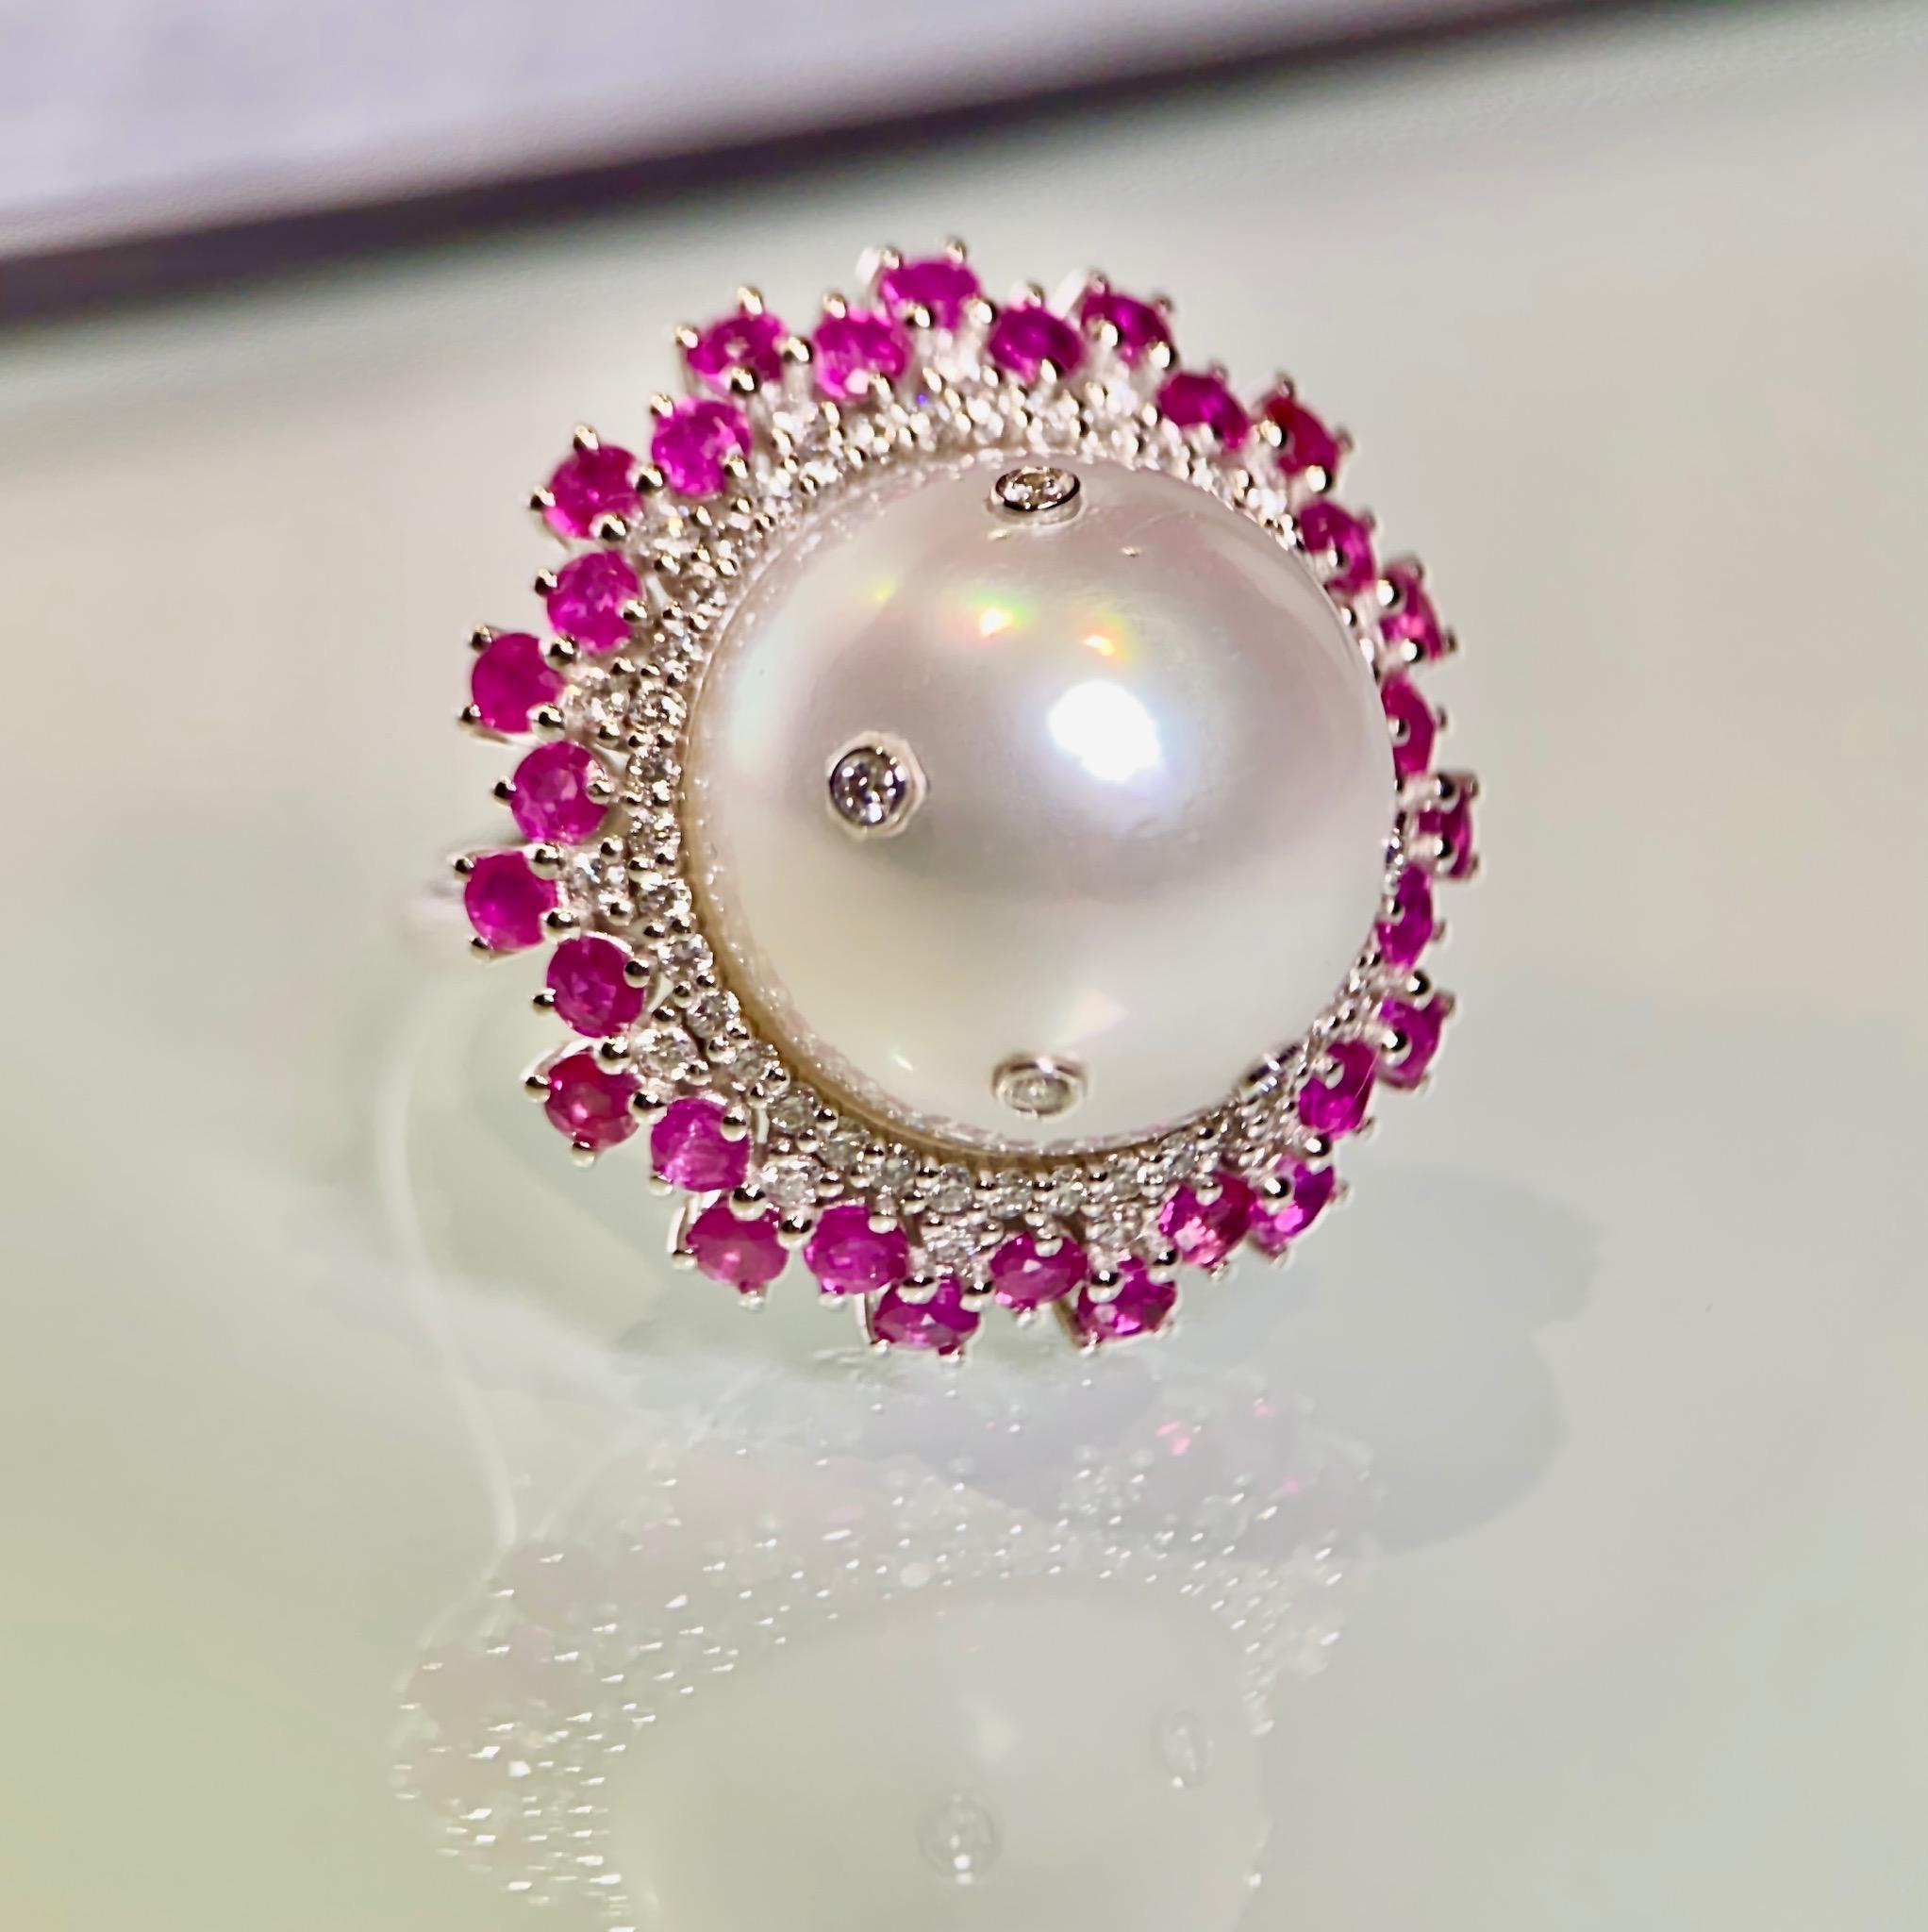 This ring comes with a massive 16.5mm White Australian South Sea Pearl. We were experimenting with adding diamonds on the surface of the pearl in order to add  sparkle and fire to the pearl and this is the end result. The Pearl is then surrounded by